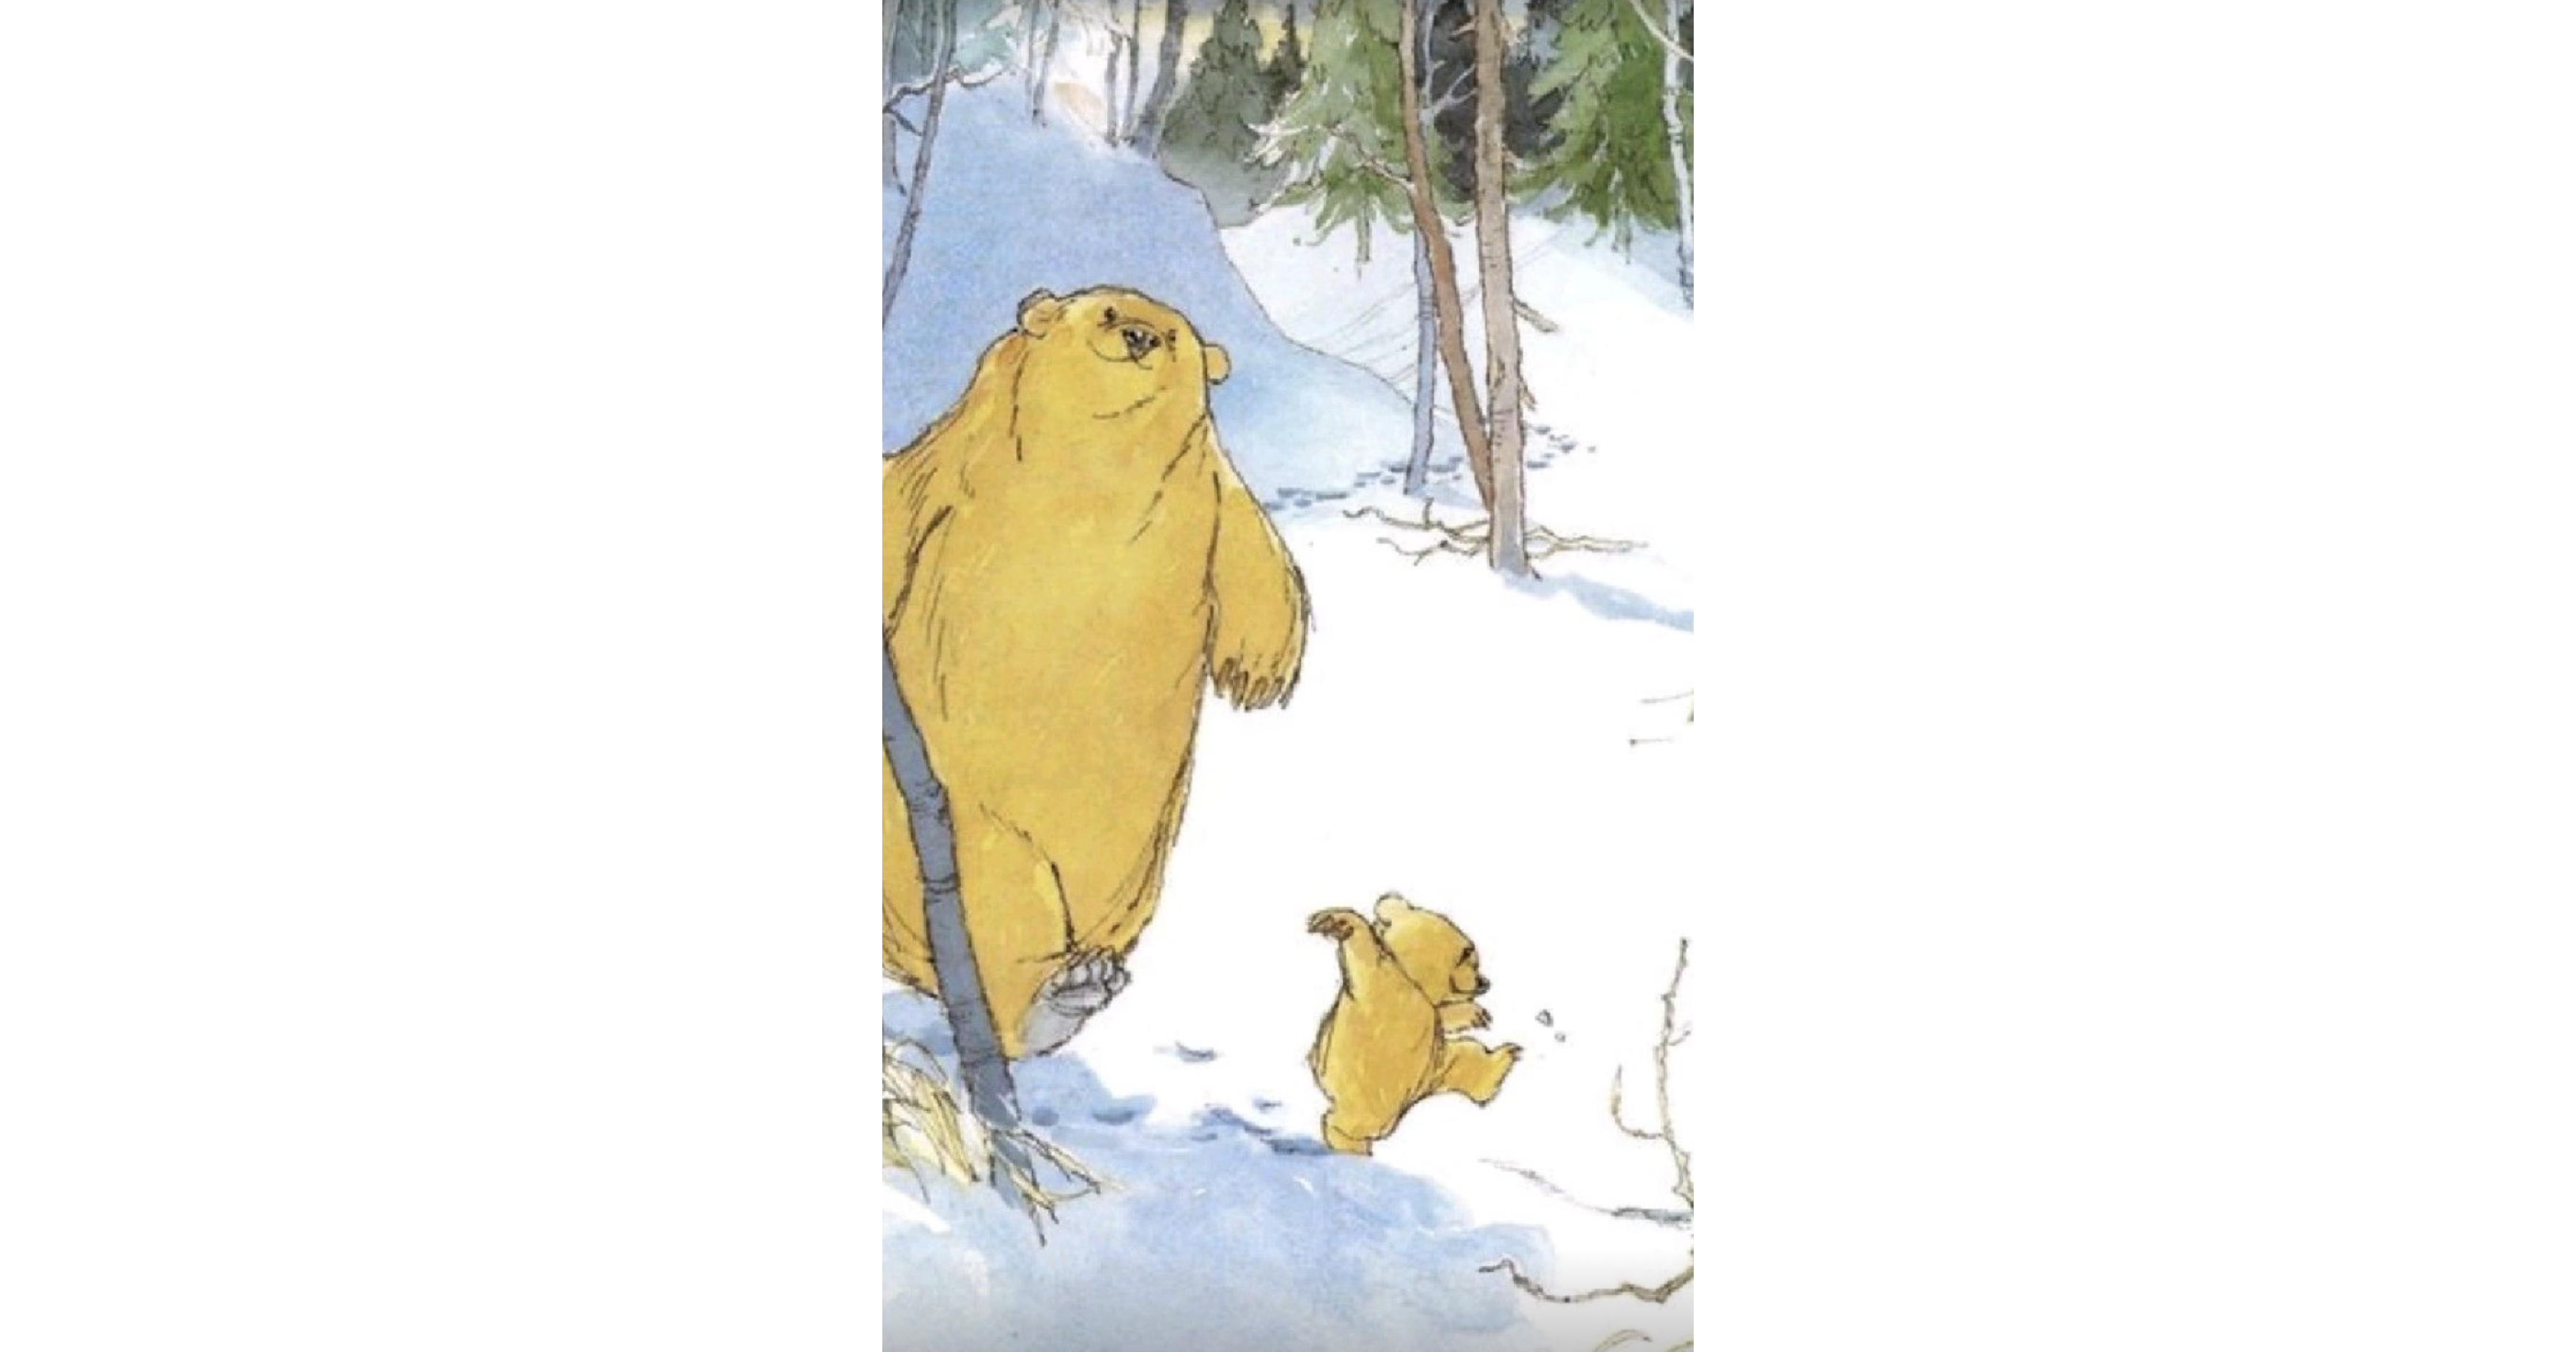 Illustration of two polar bears, an adult and a baby, frolicking in the snow with smiles on their faces